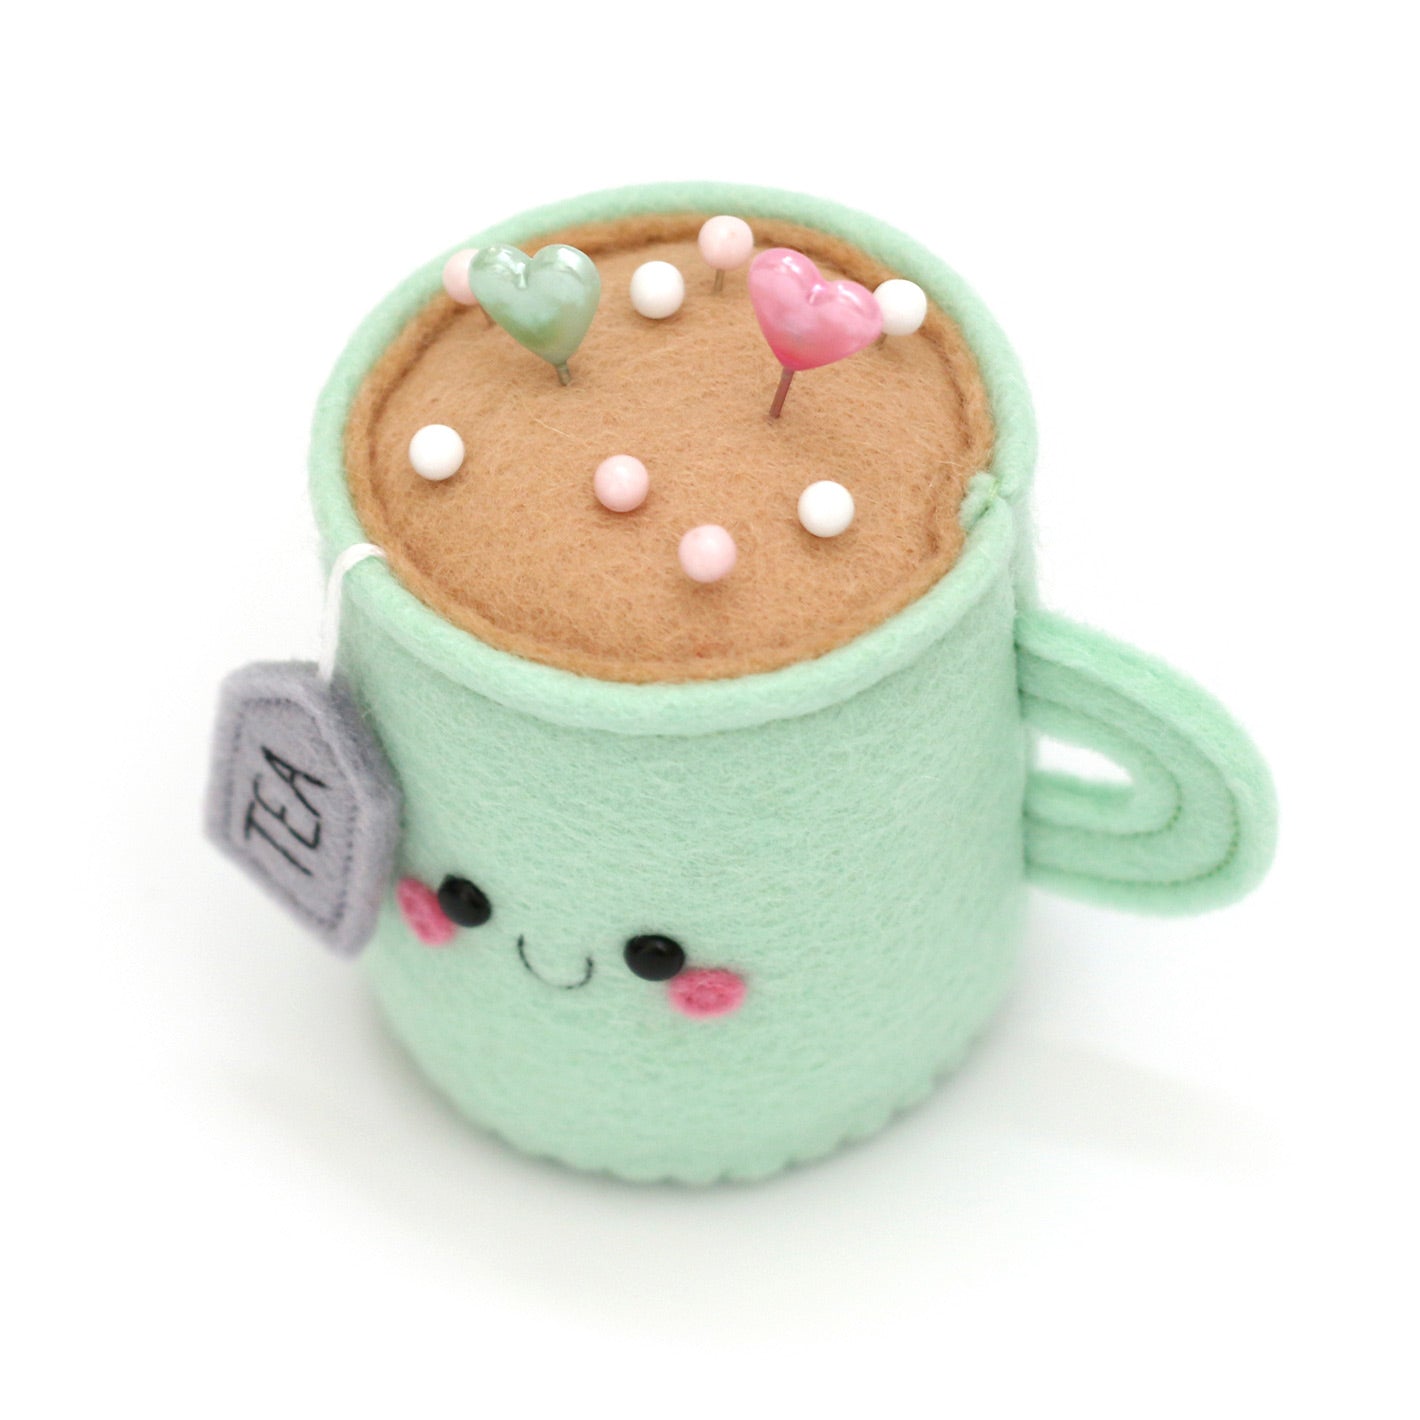 Top view of kawaii mint teacup pincushion with pins by hannahdoodle